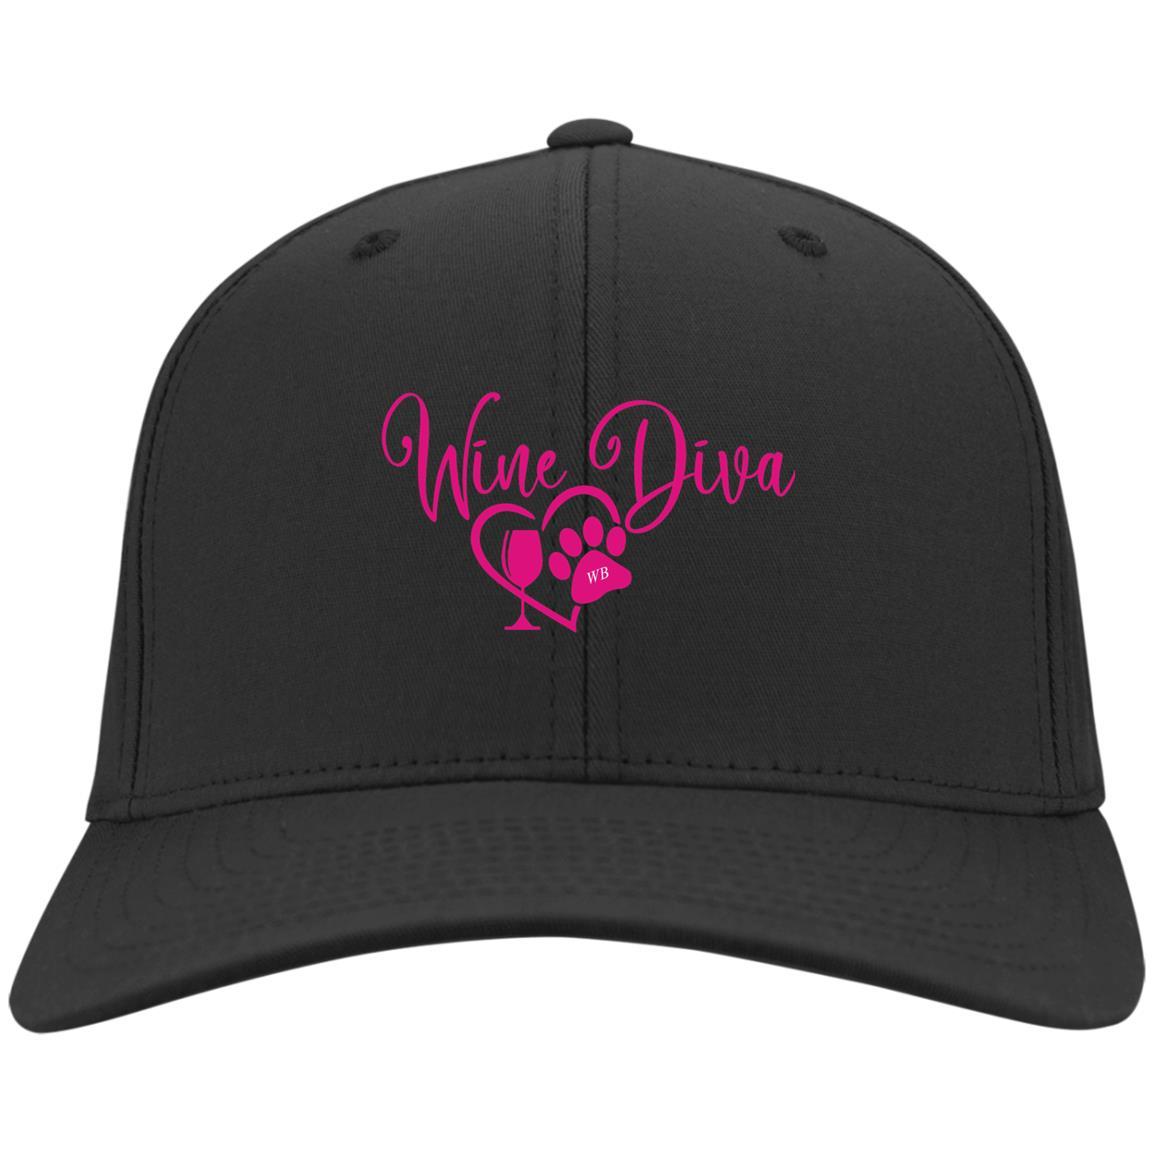 Hats Black / One Size Winey Bitches Co "Wine Diva" Embroidered Twill Cap WineyBitchesCo